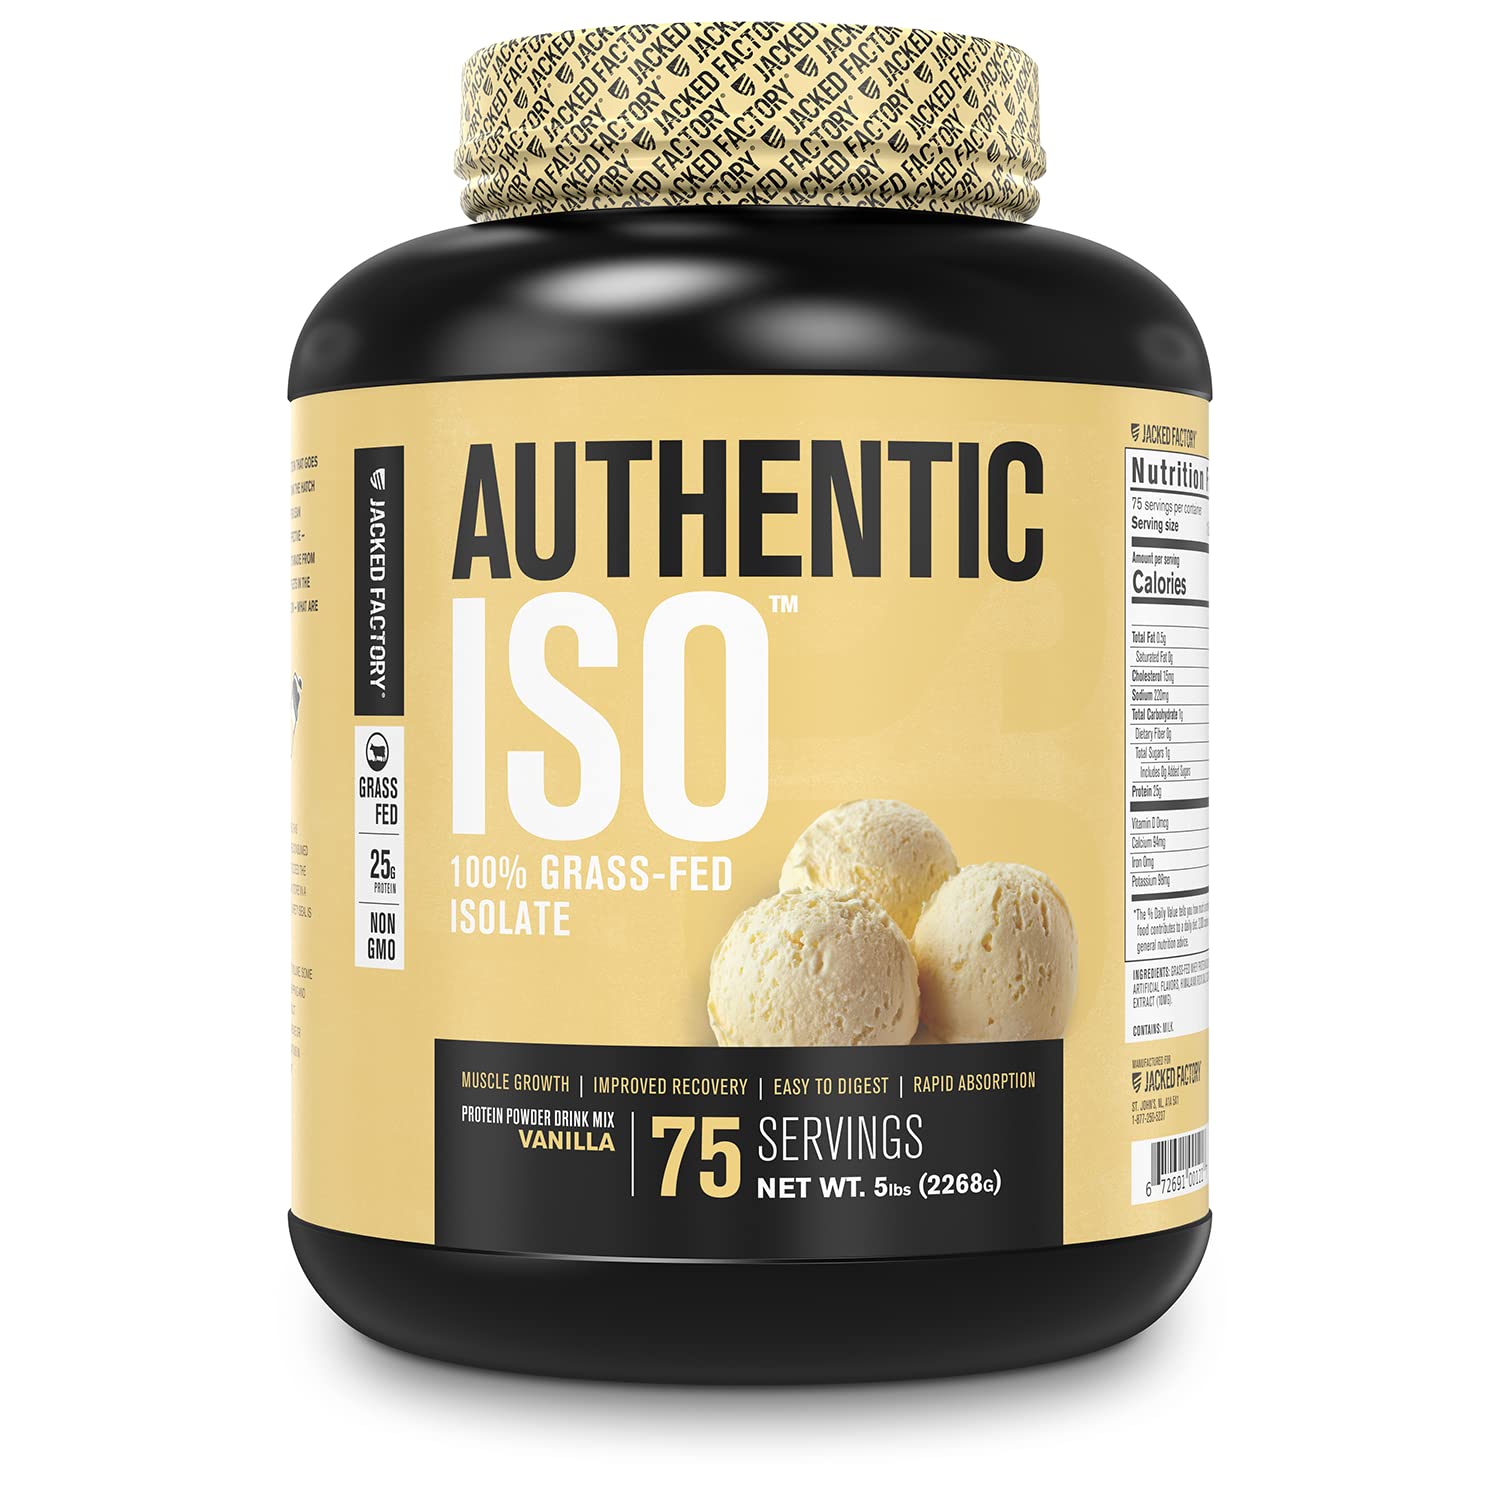 Prime Members - 5lb Authentic ISO Grass Fed Whey Protein Isolate Powder $33.49 at Jacked Factory via Amazon